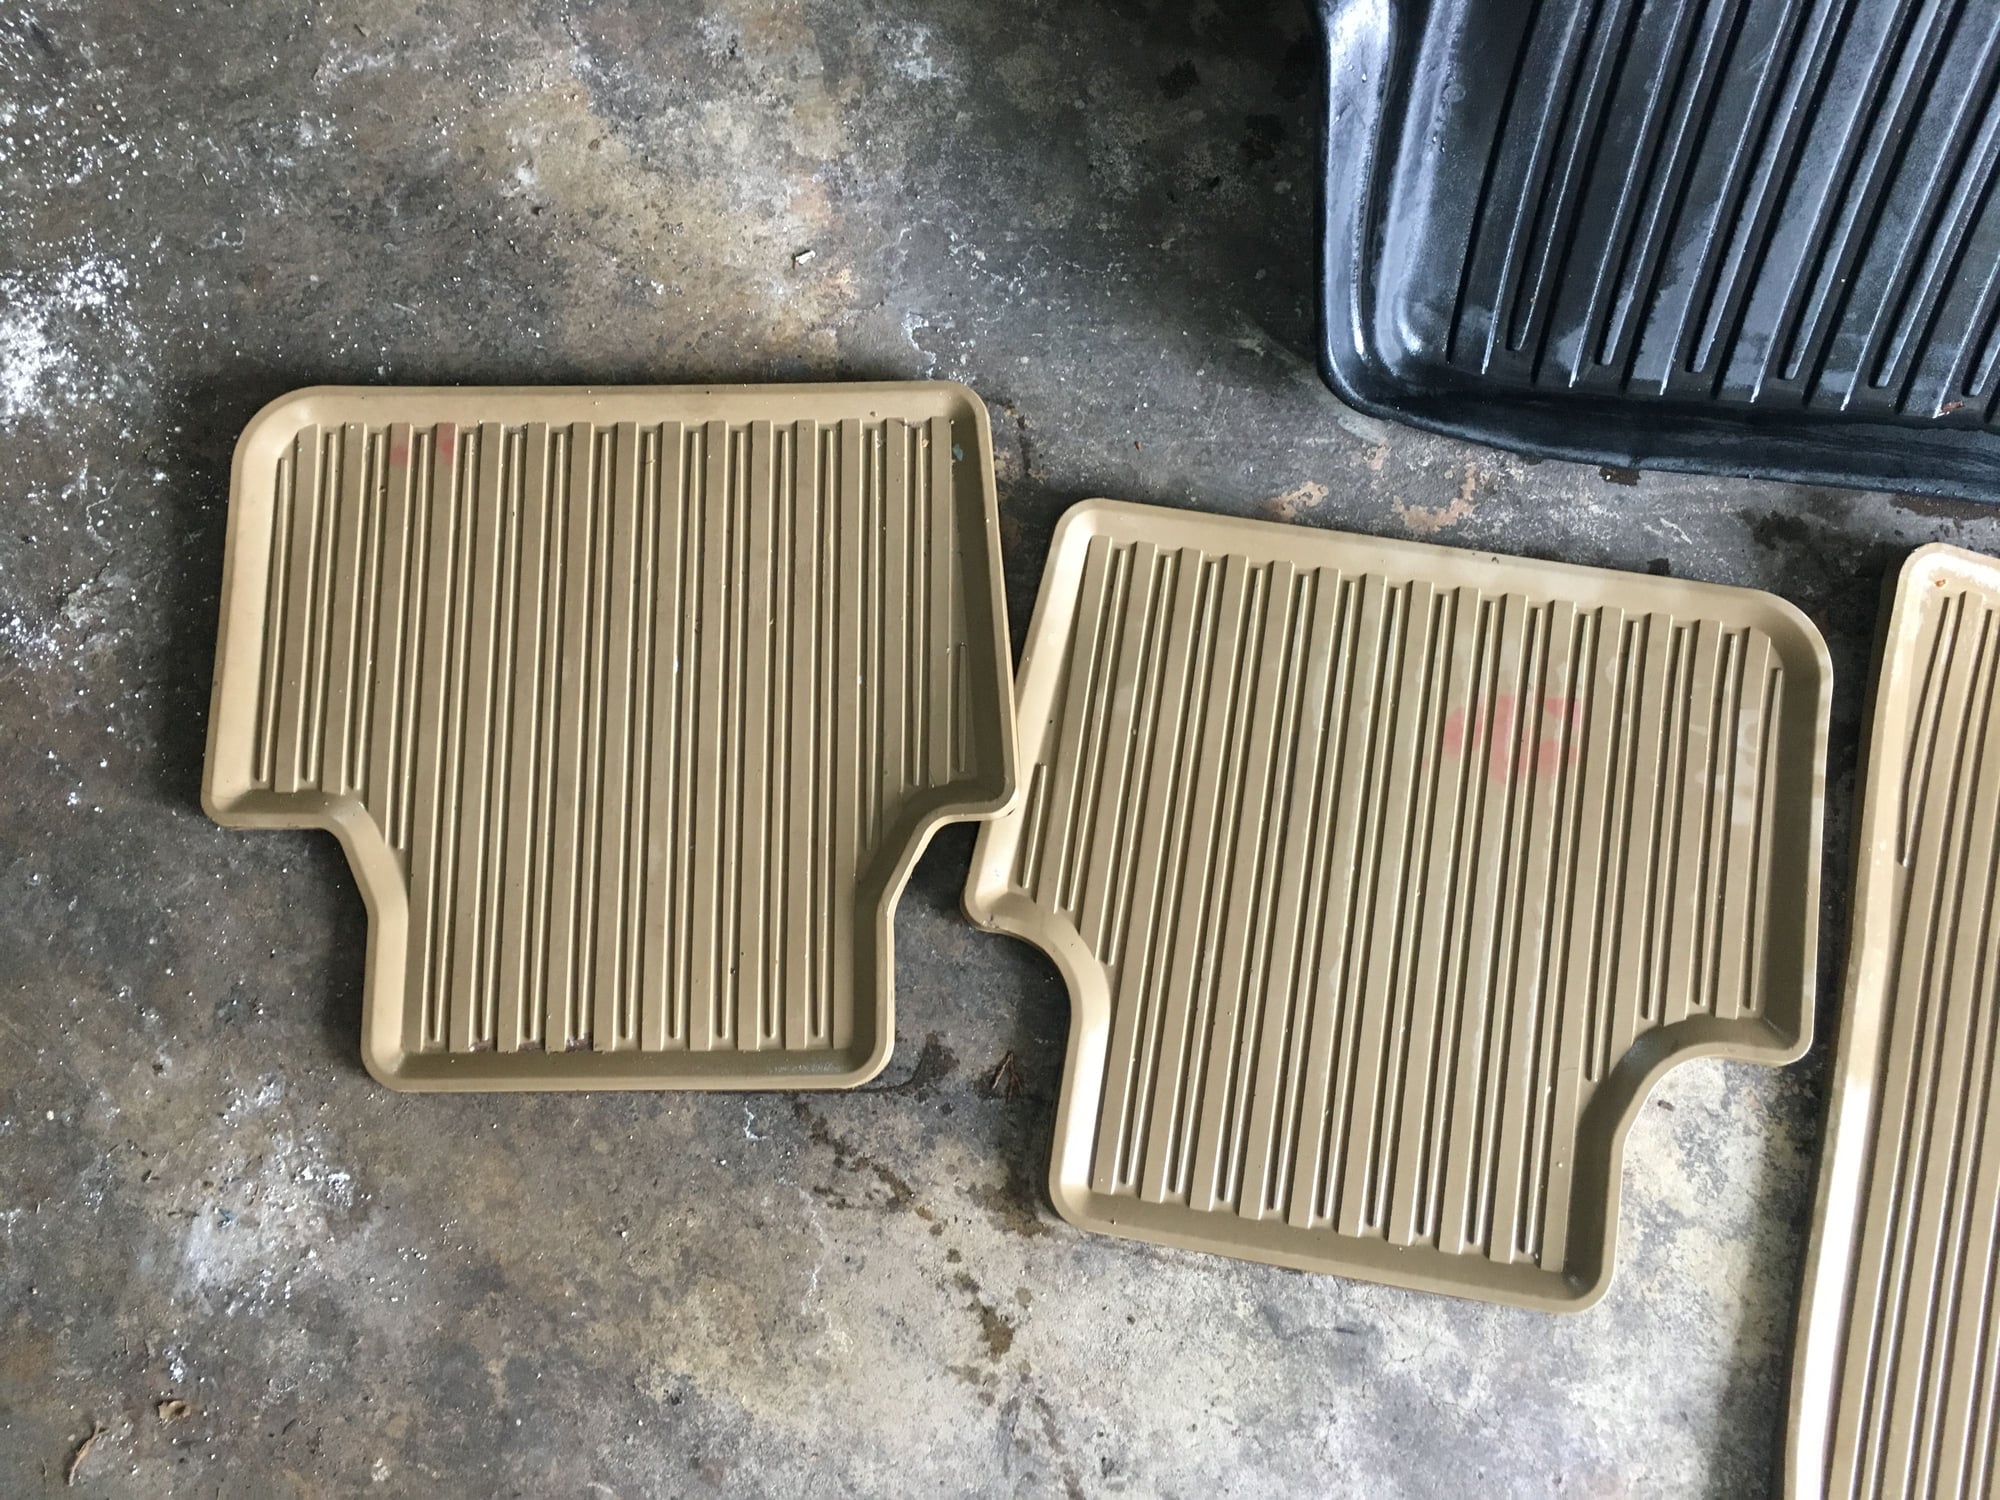 Accessories - FS: 2004 - 2008 trunk tray, carpet floor mats, and all weather floor mats - Used - 2004 to 2008 Acura TSX - West Orange, NJ 07052, United States